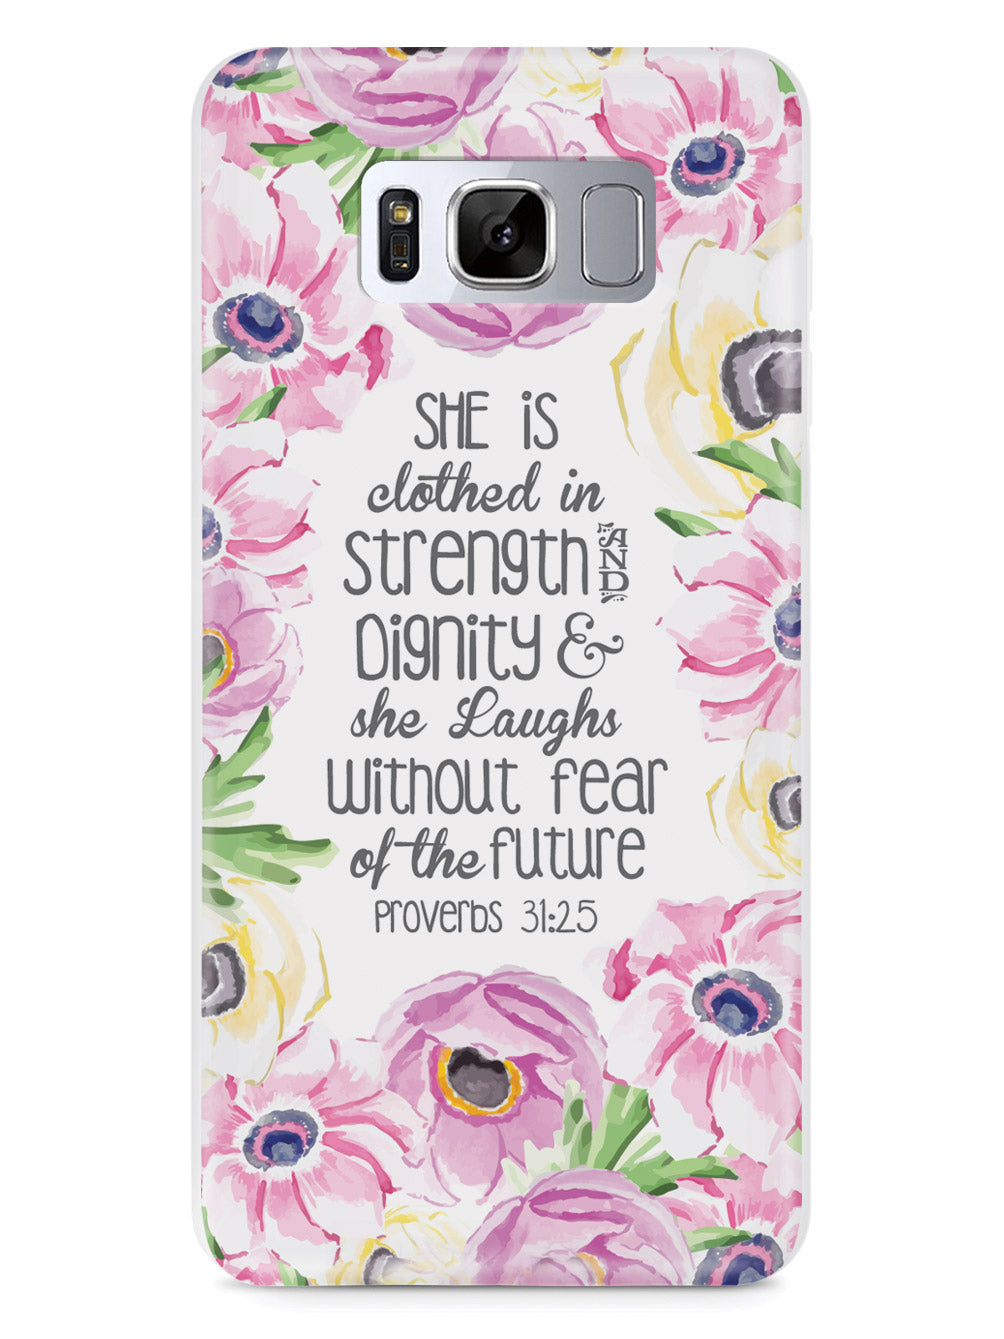 Proverbs 31.25 - Bible Verse Quote Inspirational Design Case